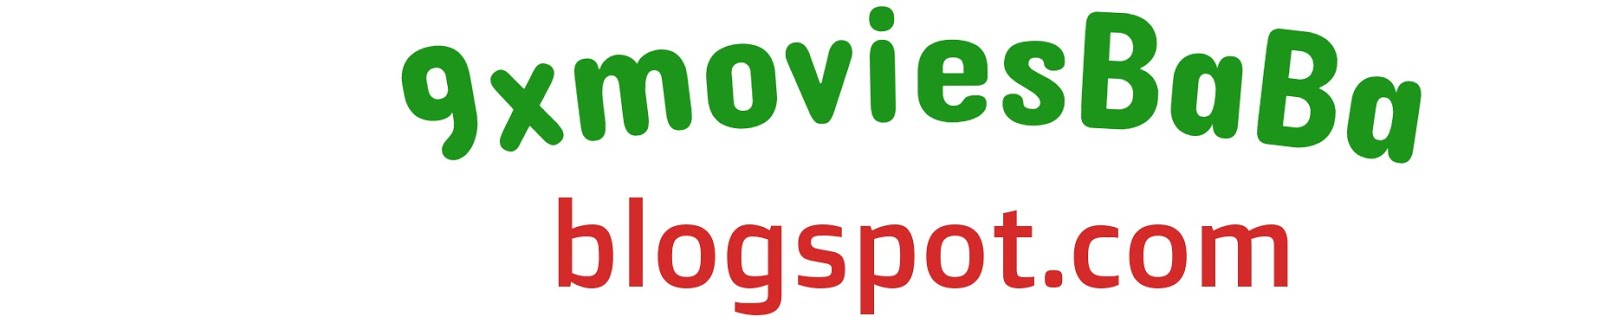 Download Free Bollywood, Hollywood Hindi Dubbed HD Full Movies From 9xmoviesbaba.blogspot.com 